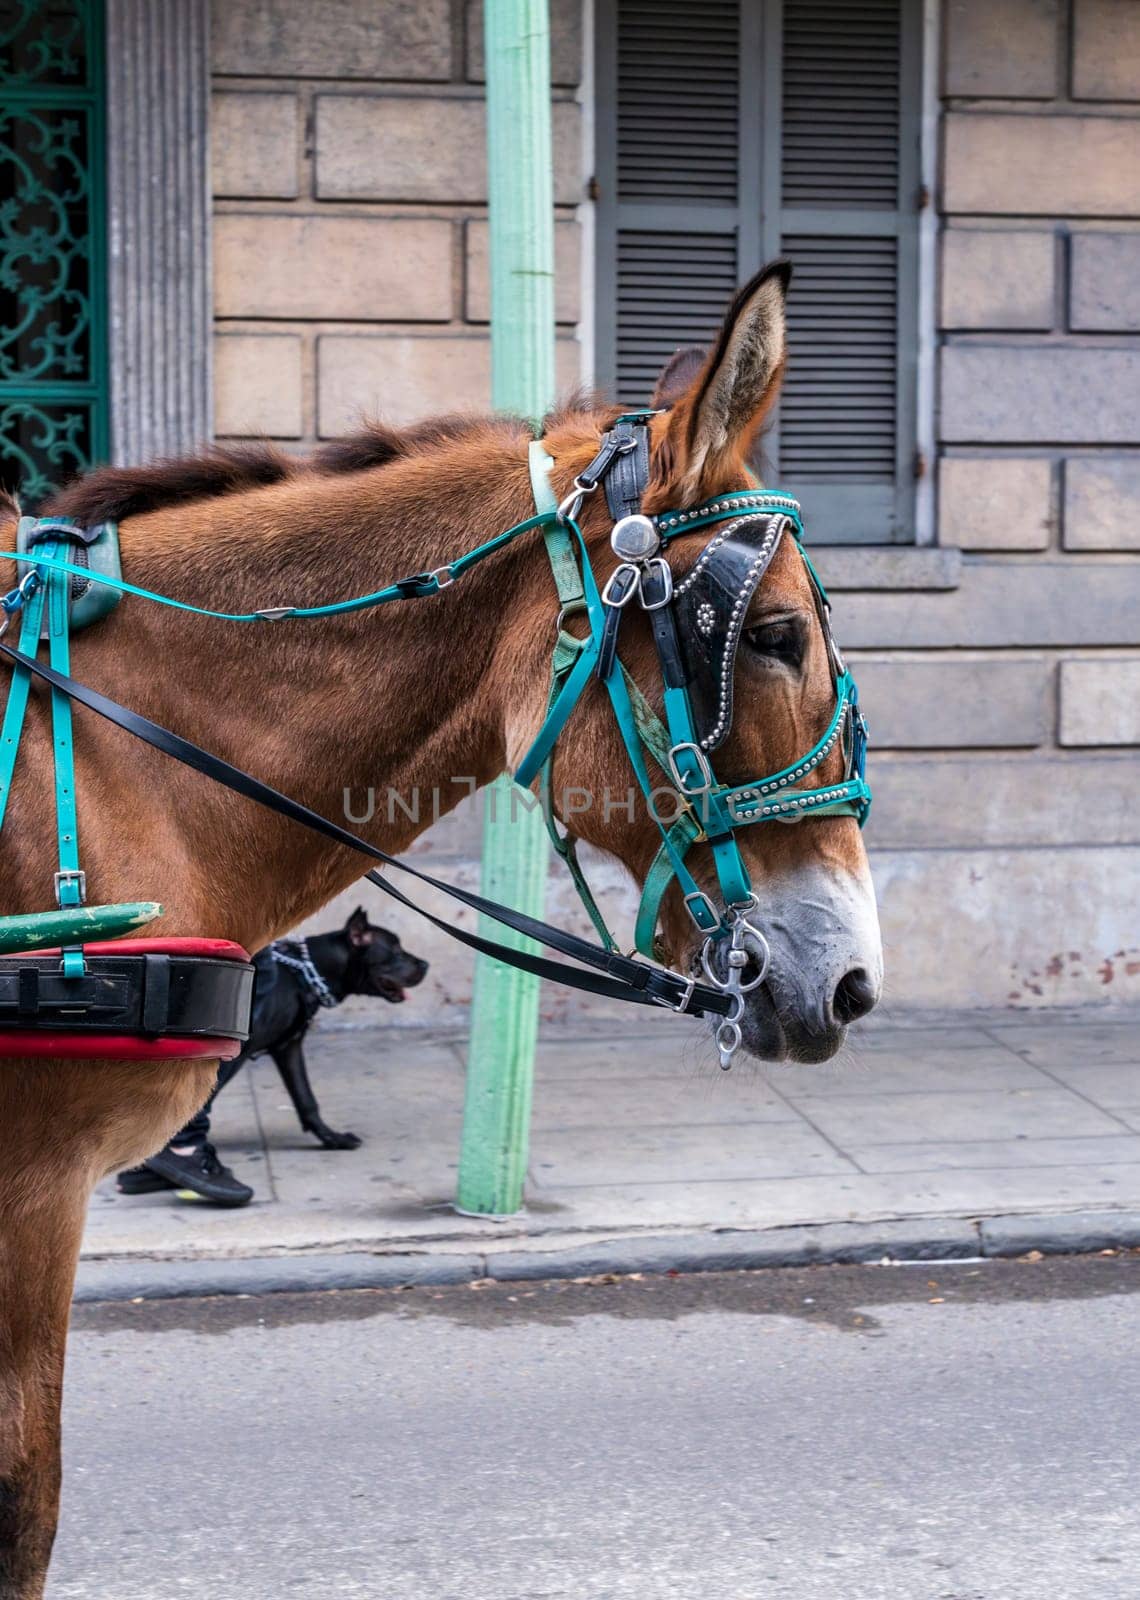 Horse head pulling carriage in French Quarter of New Orleans with dog on sidewalk or pavement